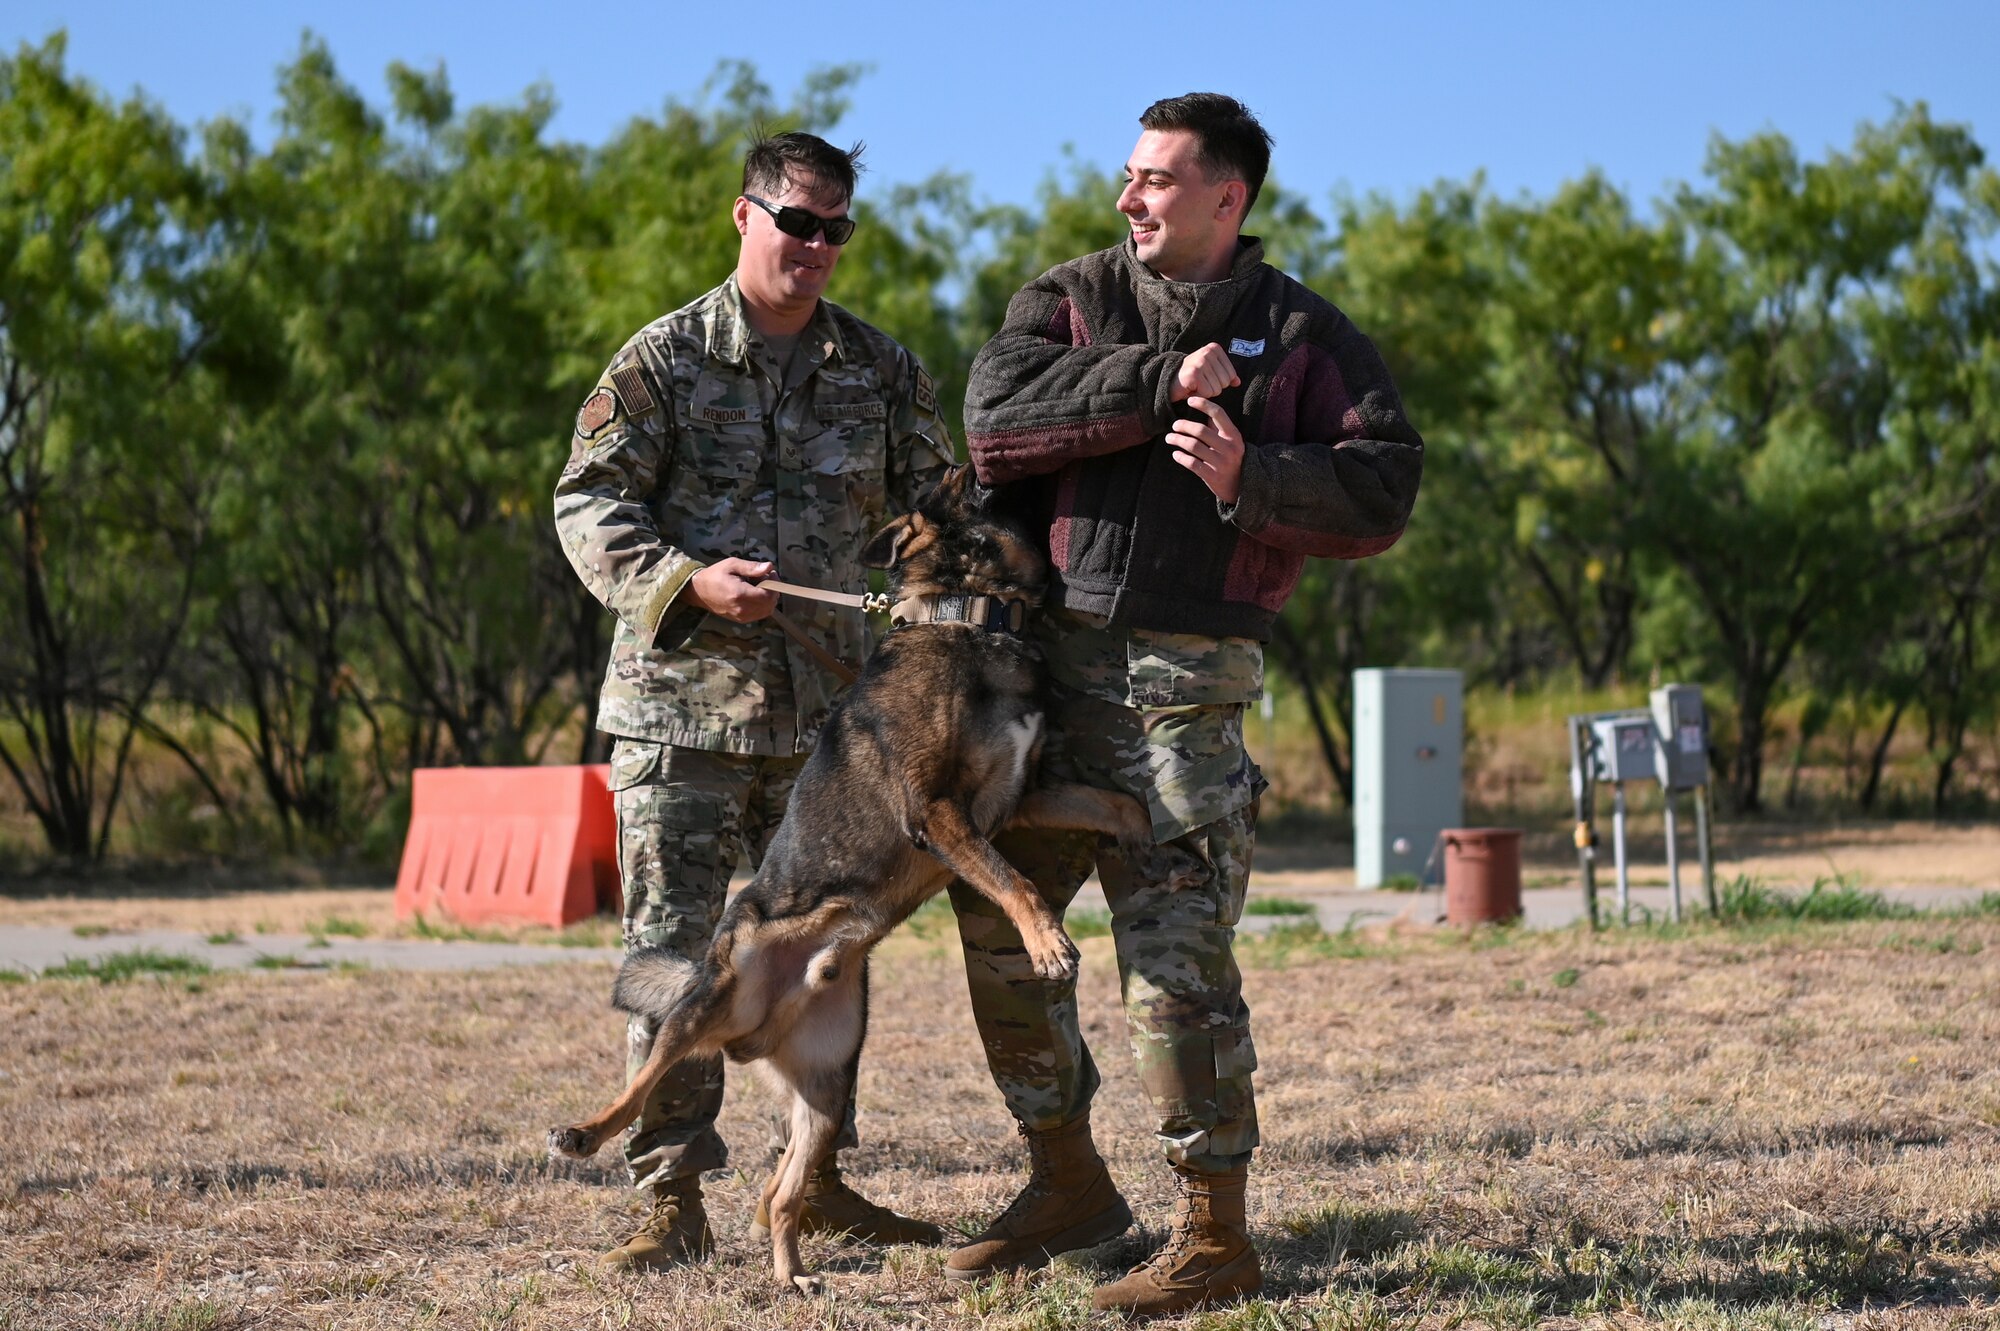 U.S. Air Force Staff Sgt. Eric Rendon, 7th Security Forces Squadron military working dog trainer, demonstrates military working dog capabilities with Michael Lenahan, University of Tennessee Air Force ROTC cadet, during Project Tuskegee 2.0 at Dyess Air Force Base, Texas, Aug. 2, 2023. The project is intended to increase the cadets' understanding of Air Force and Space Force missions and day-to-day operations. The 19 cadets in attendance represent 19 different Air Force ROTC detachments across the enterprise's four regions. (U.S. Air Force photo by Airman 1st Class Emma Anderson)